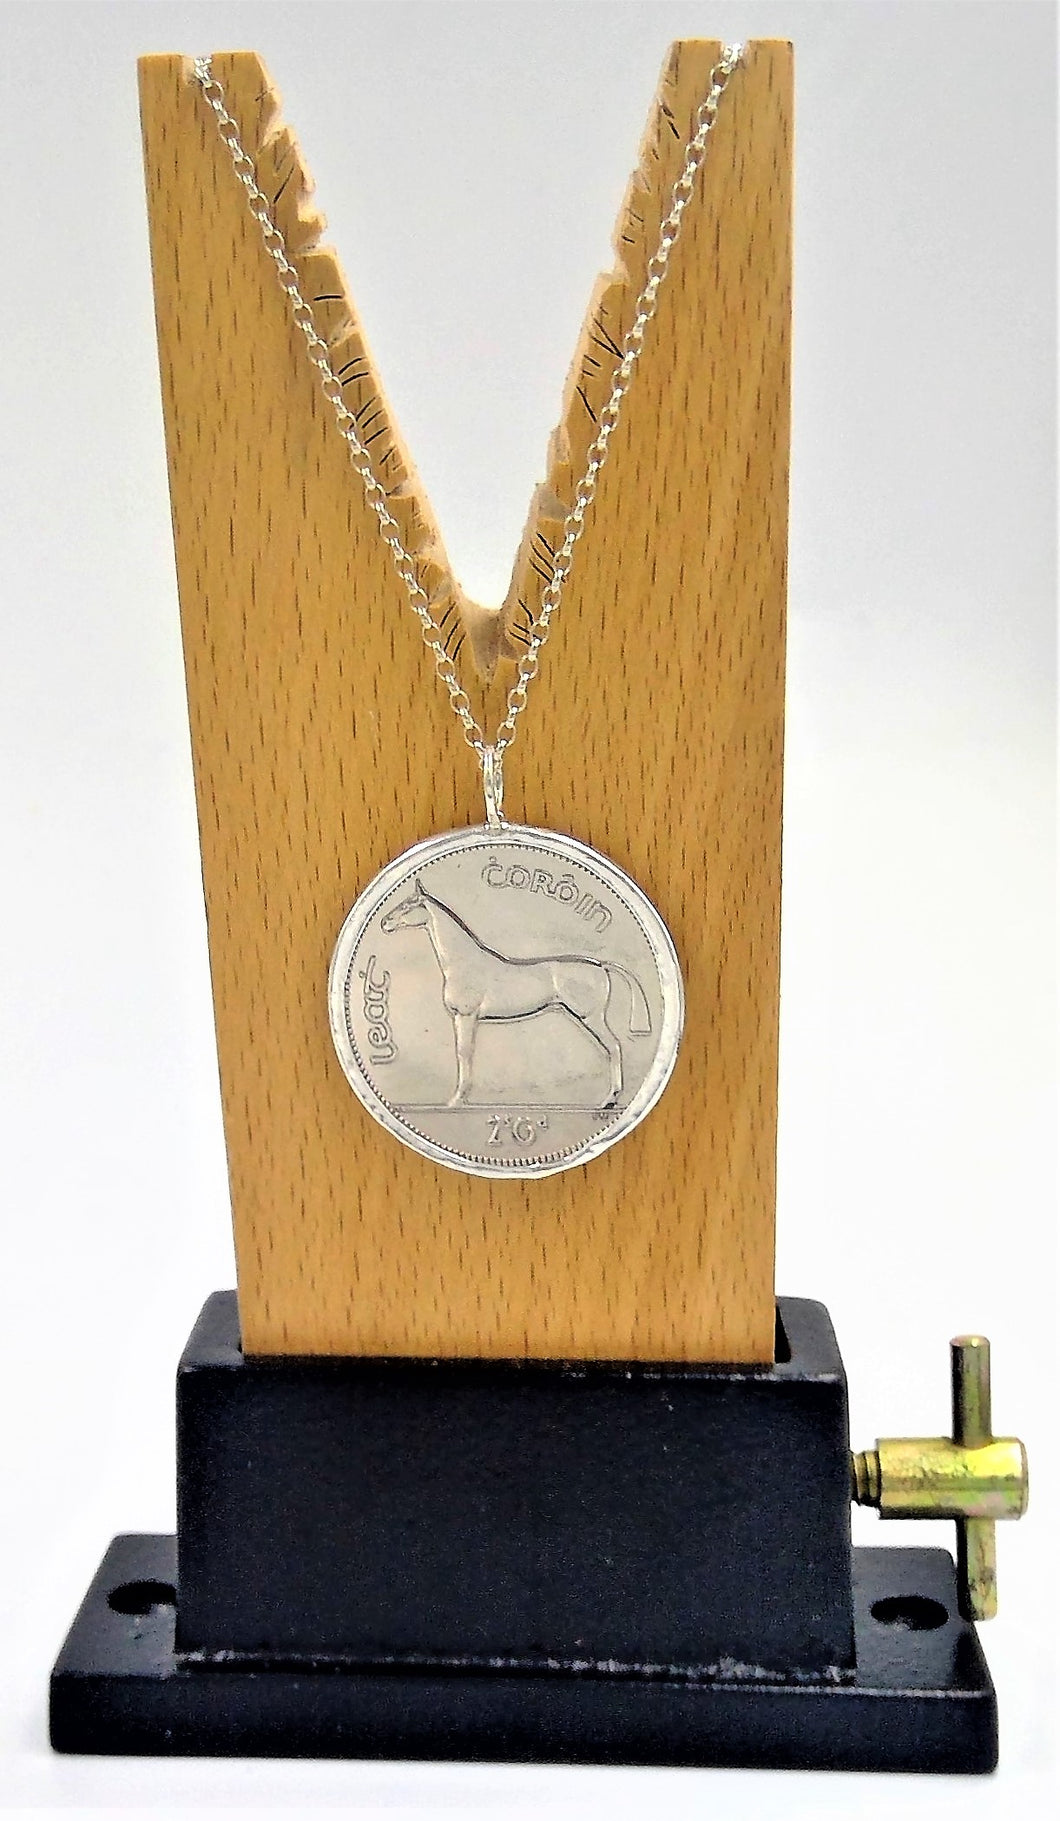 'Half crown' (2 and sixpence) Coin pendant